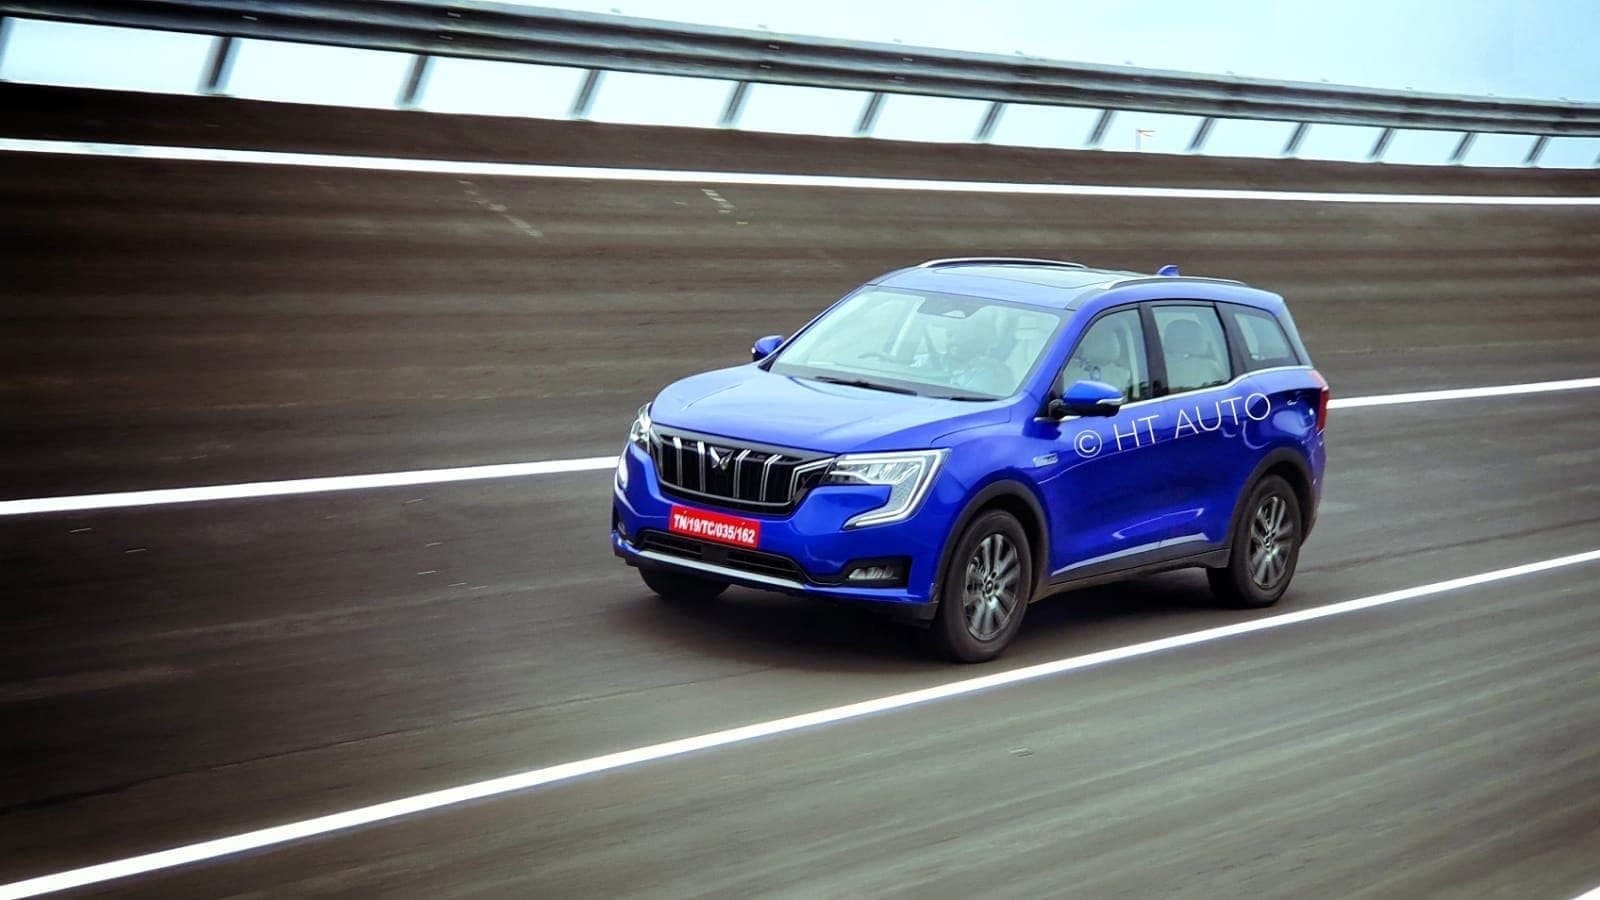 Mahindra XUV700 price leaked, may go up to ₹22 lakh: Reports